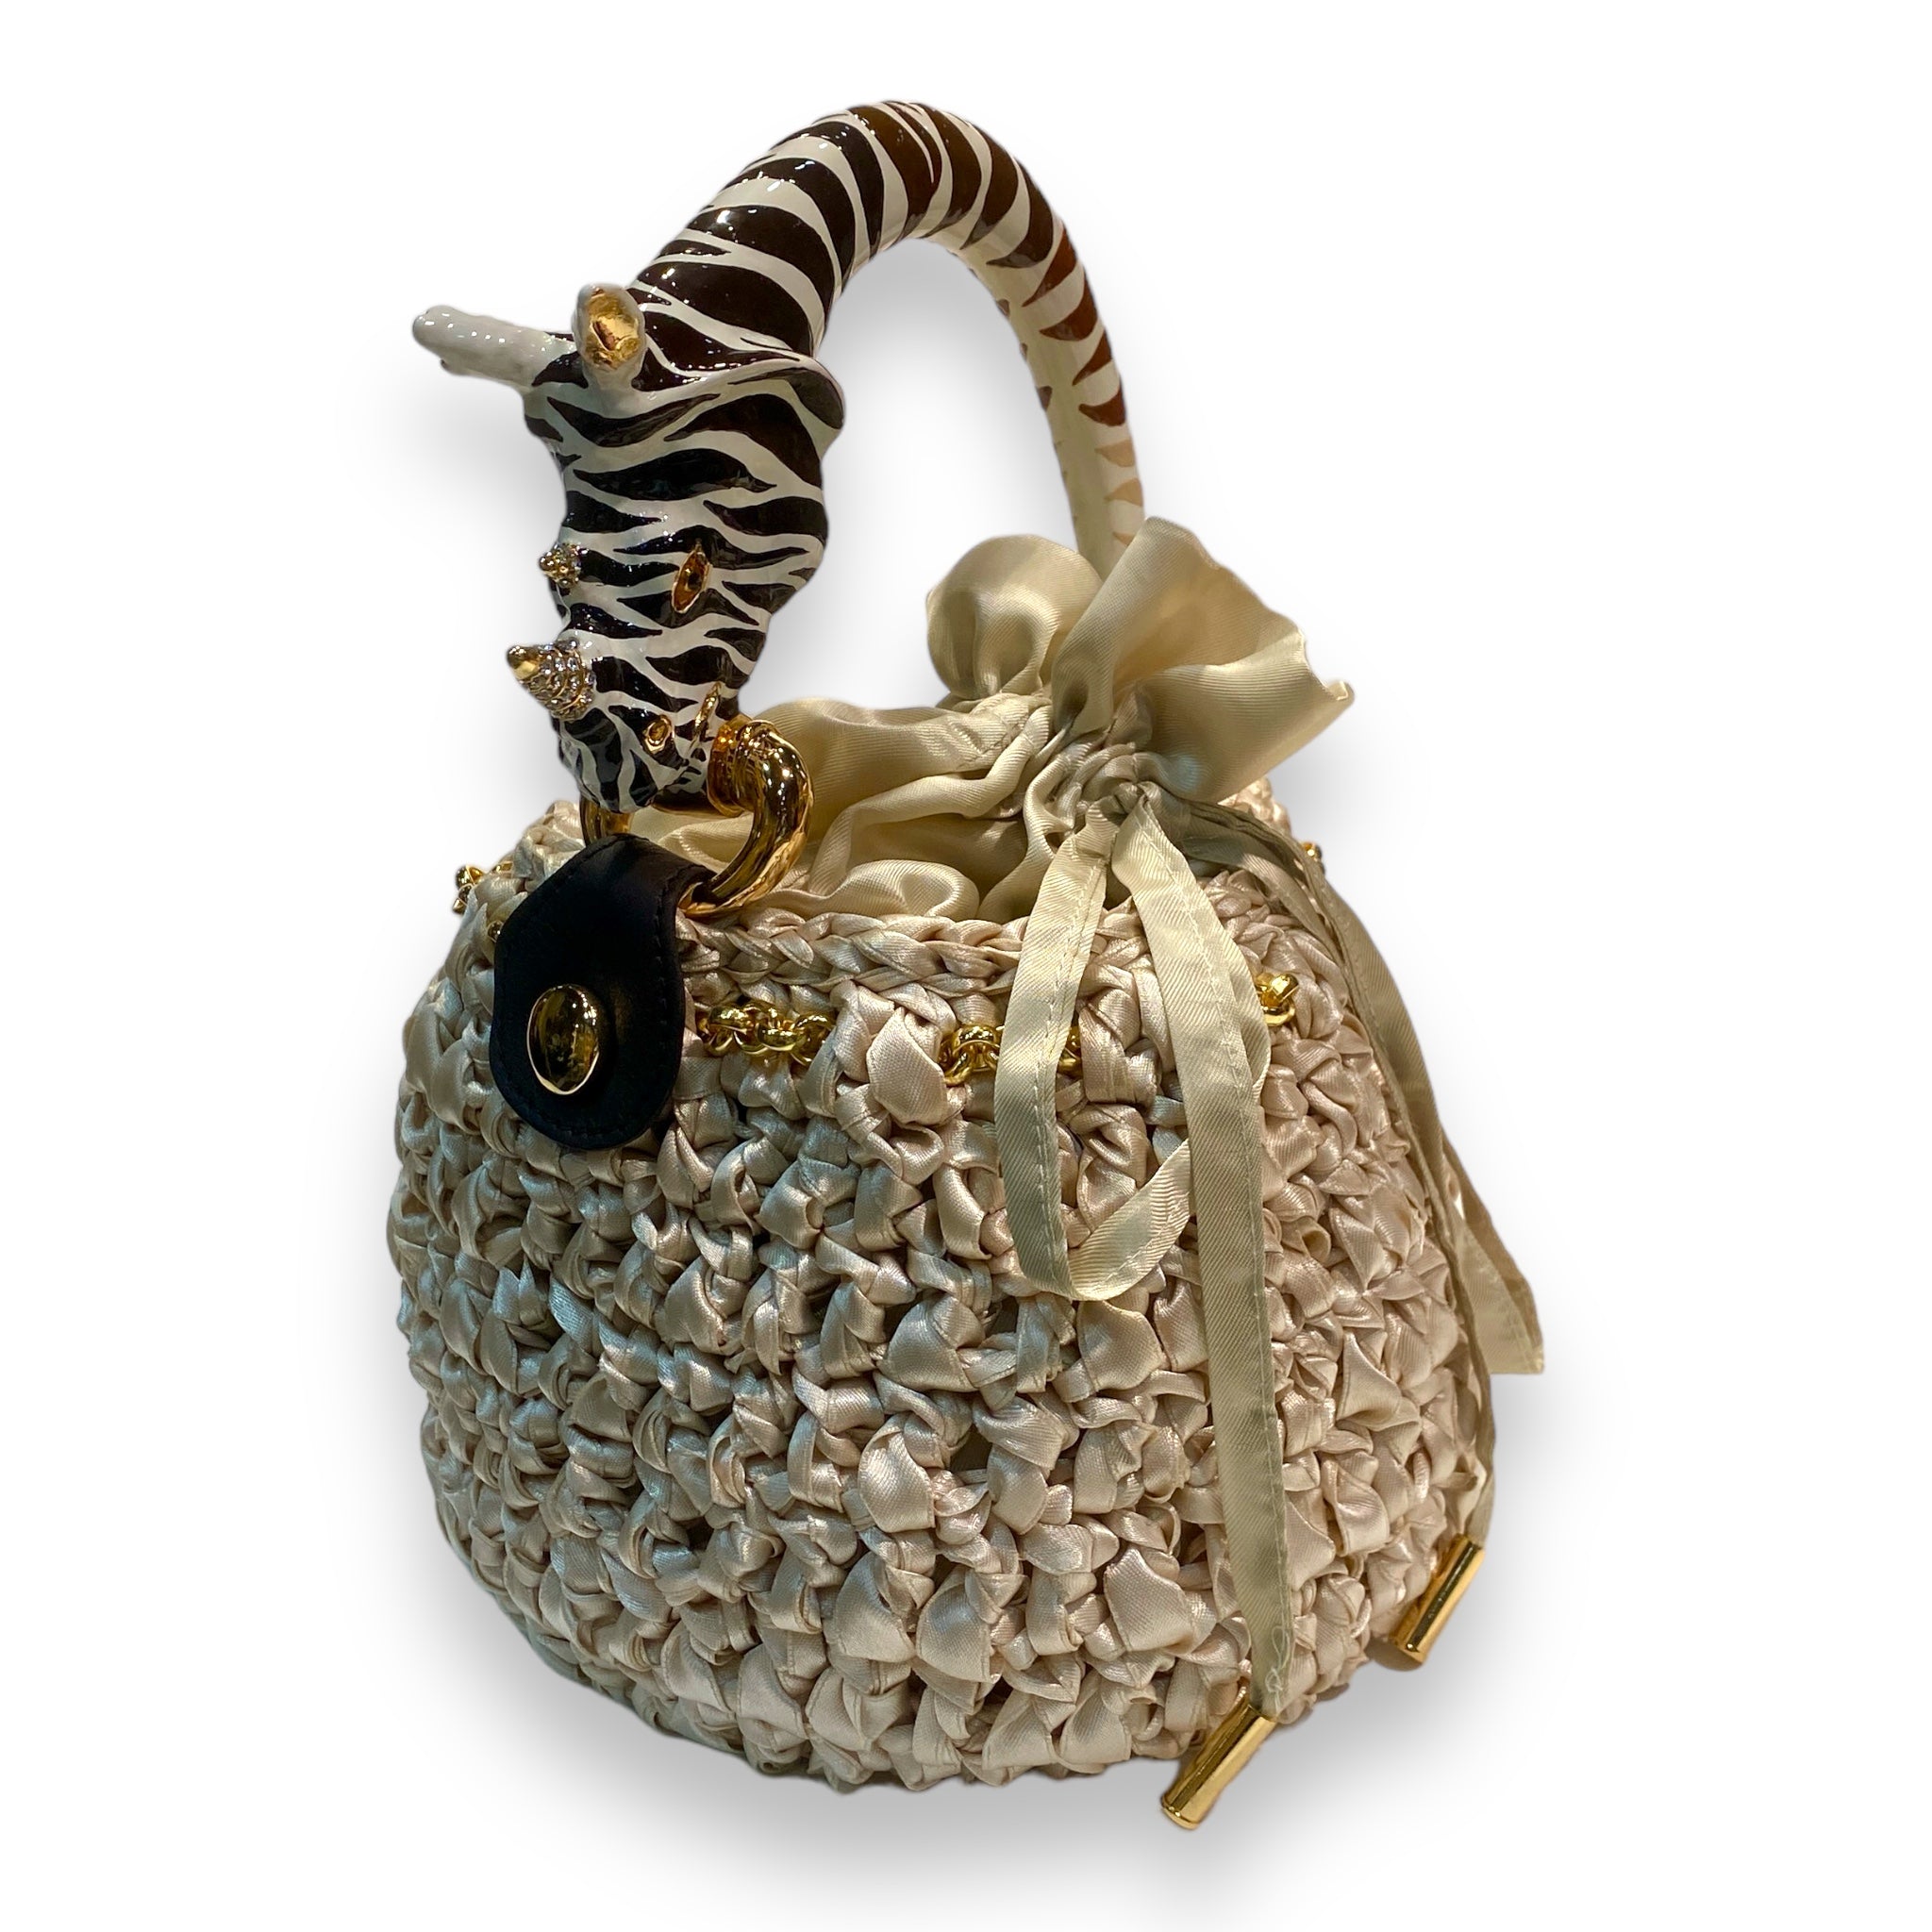 Bucket with Handle Ornated with Enameled Rhinoceros Made in Italy